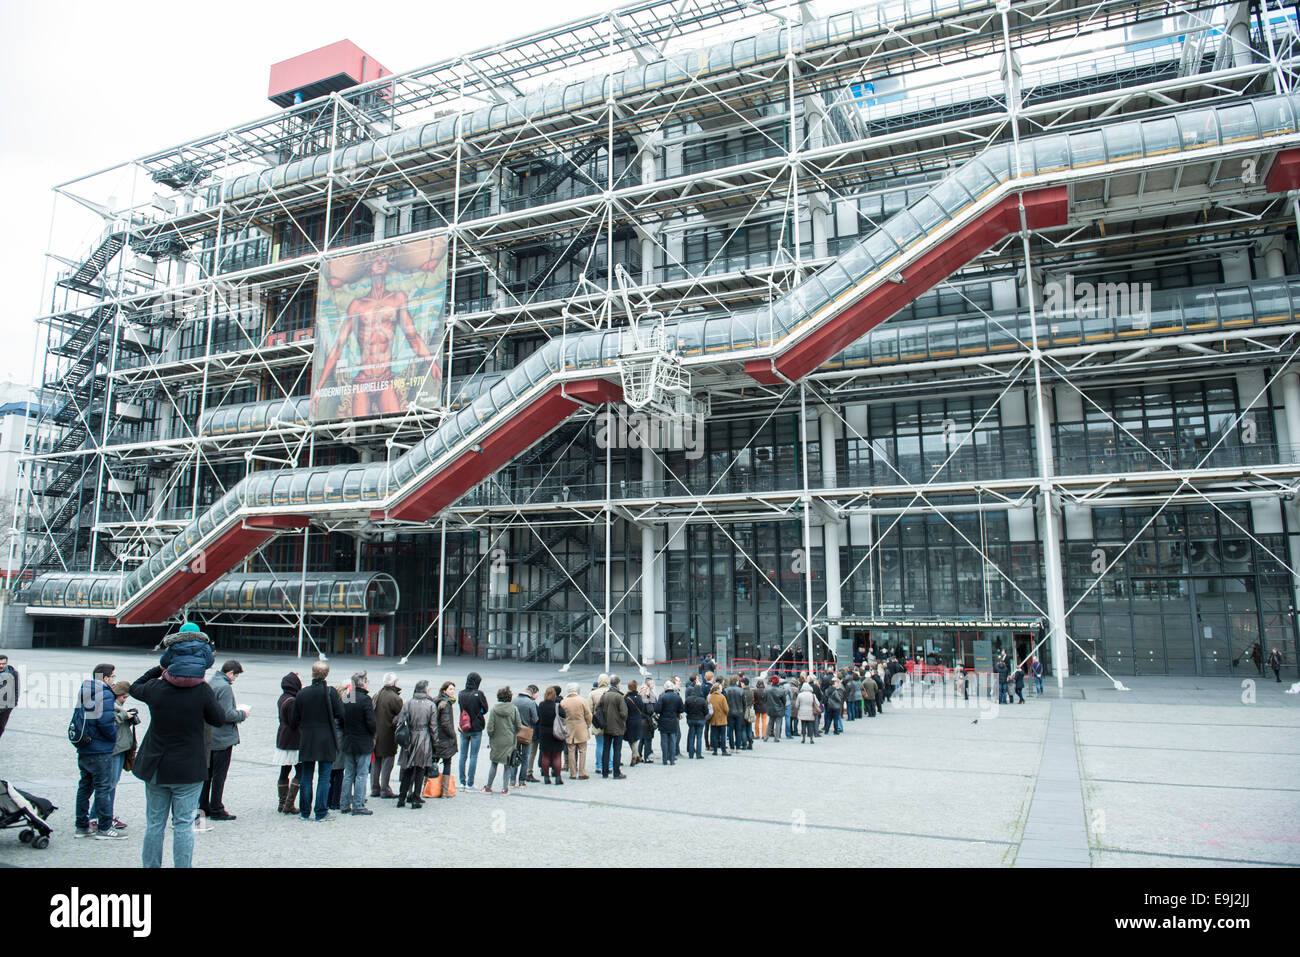 tourists and french people queuing outside the Centre Georges Pompidou in France's capital city Paris waiting to go into the art gallery and museum Stock Photo